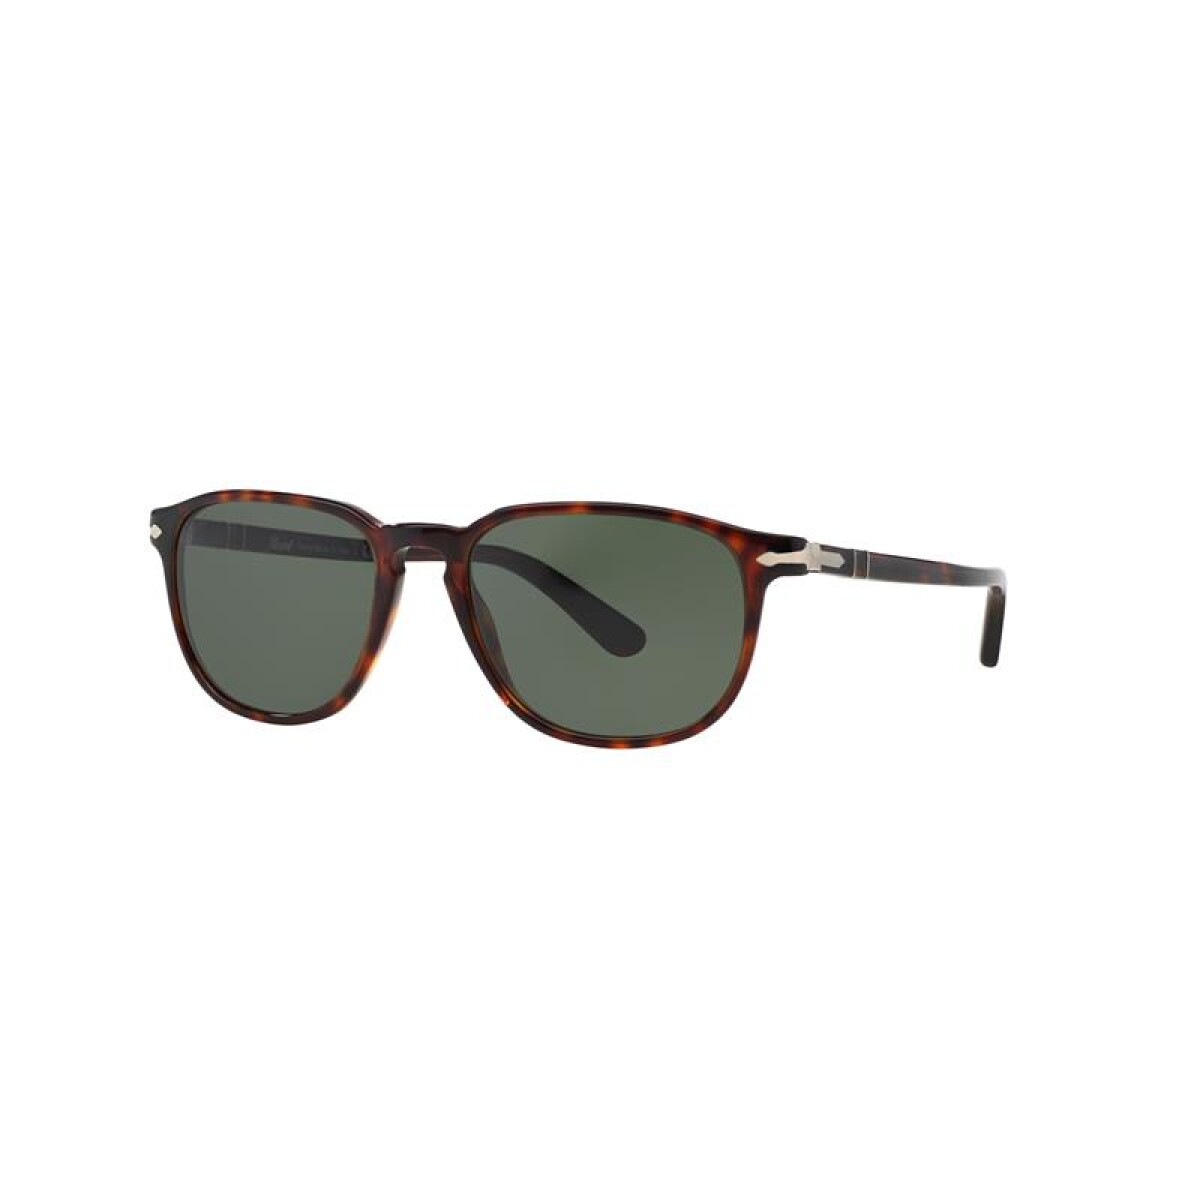 Persol 3019-s - 24/31 